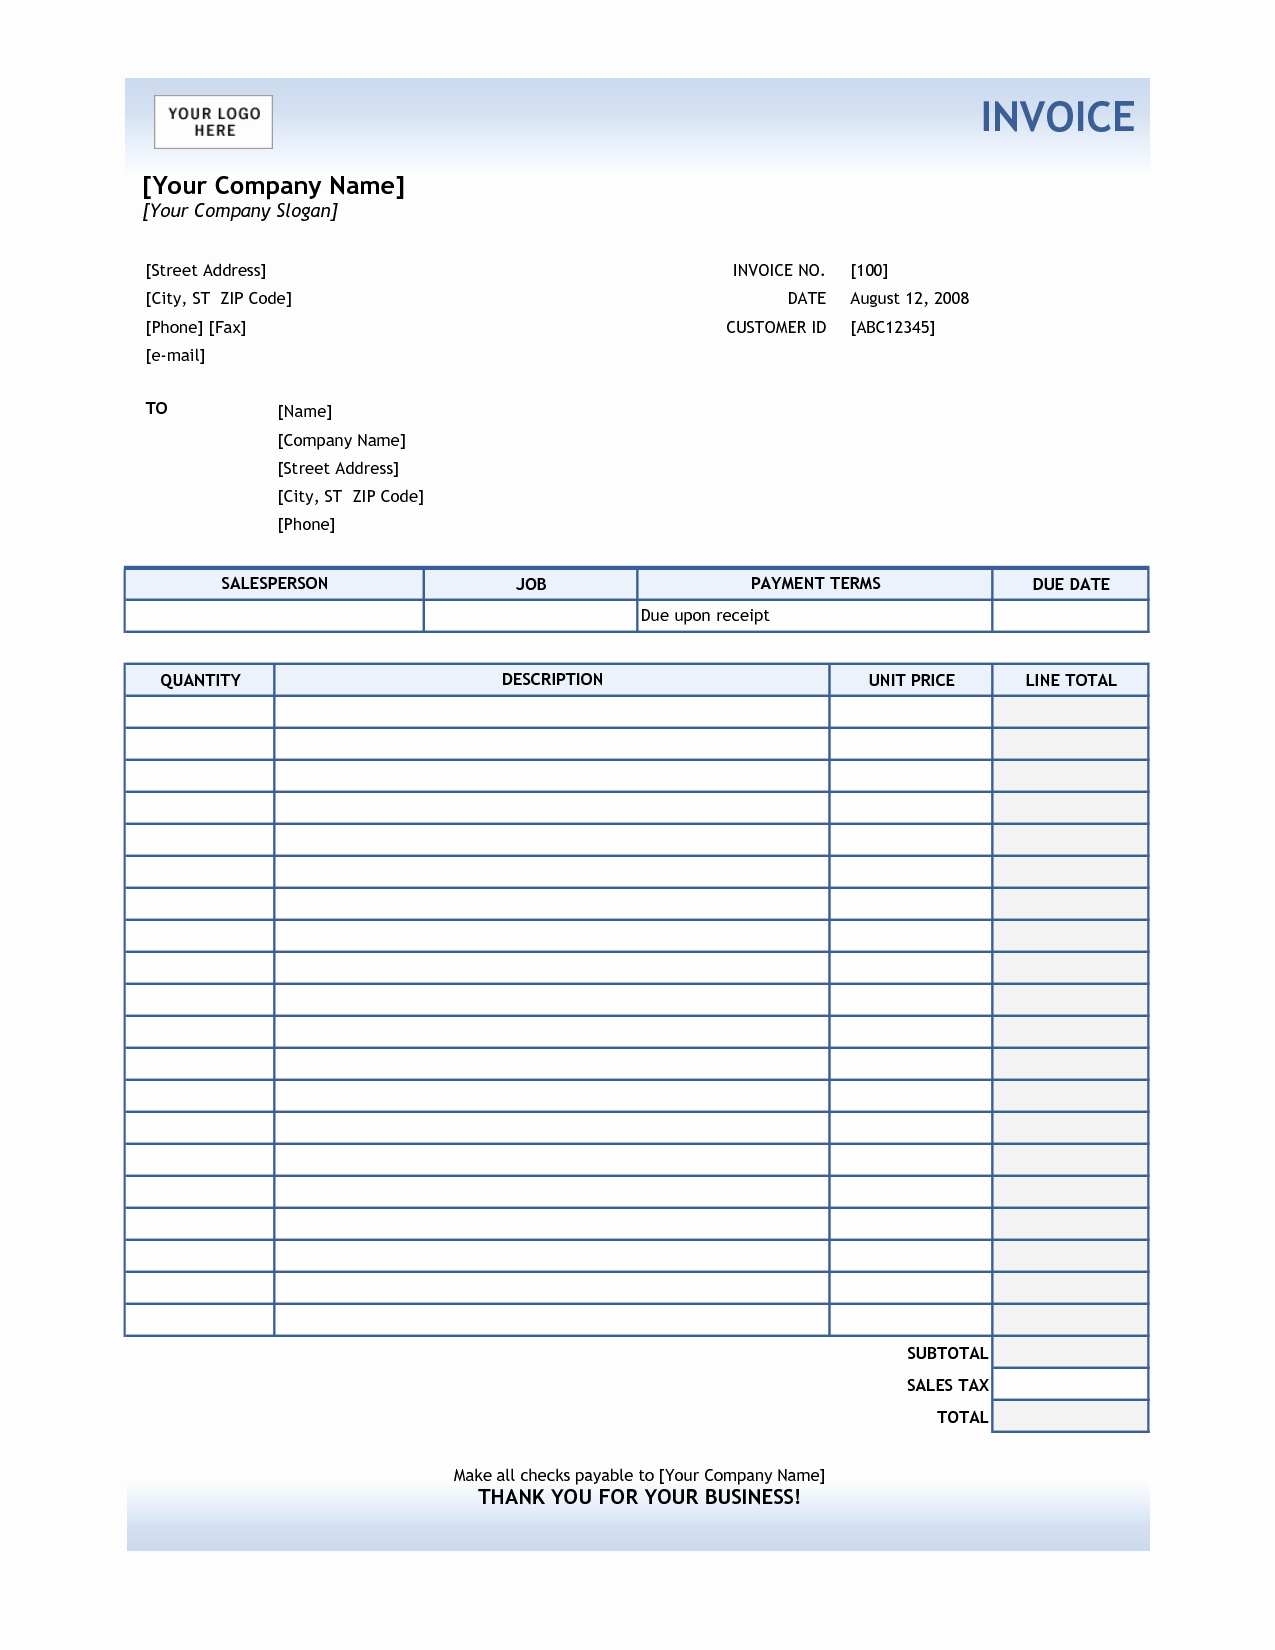 Invoice Bill format In Excel Awesome Service Invoice Template Excel